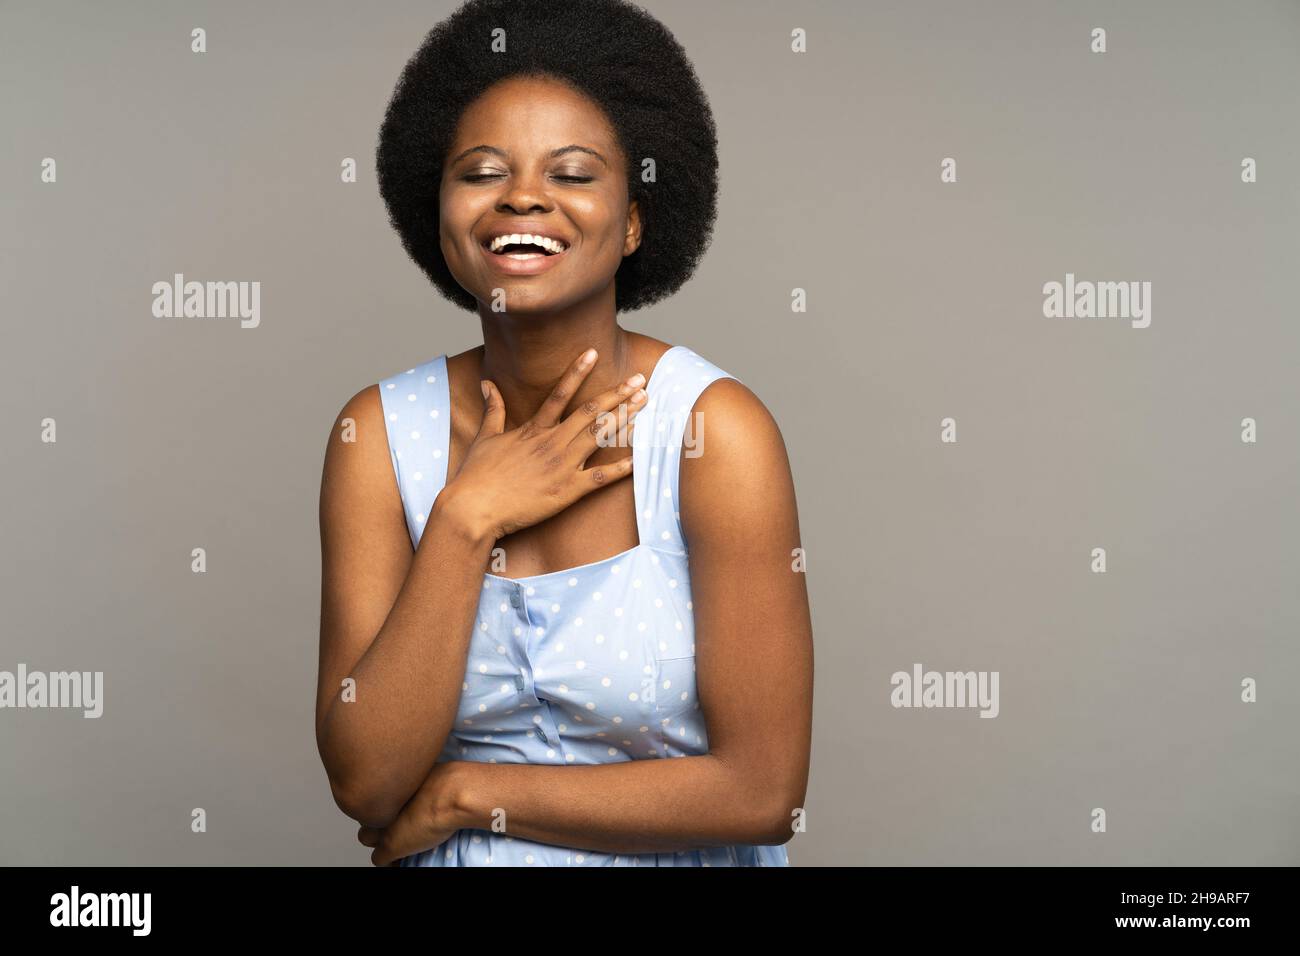 Cheerful african woman in blue dress happy laughing. Delightful young girl smiling with closed eyes Stock Photo